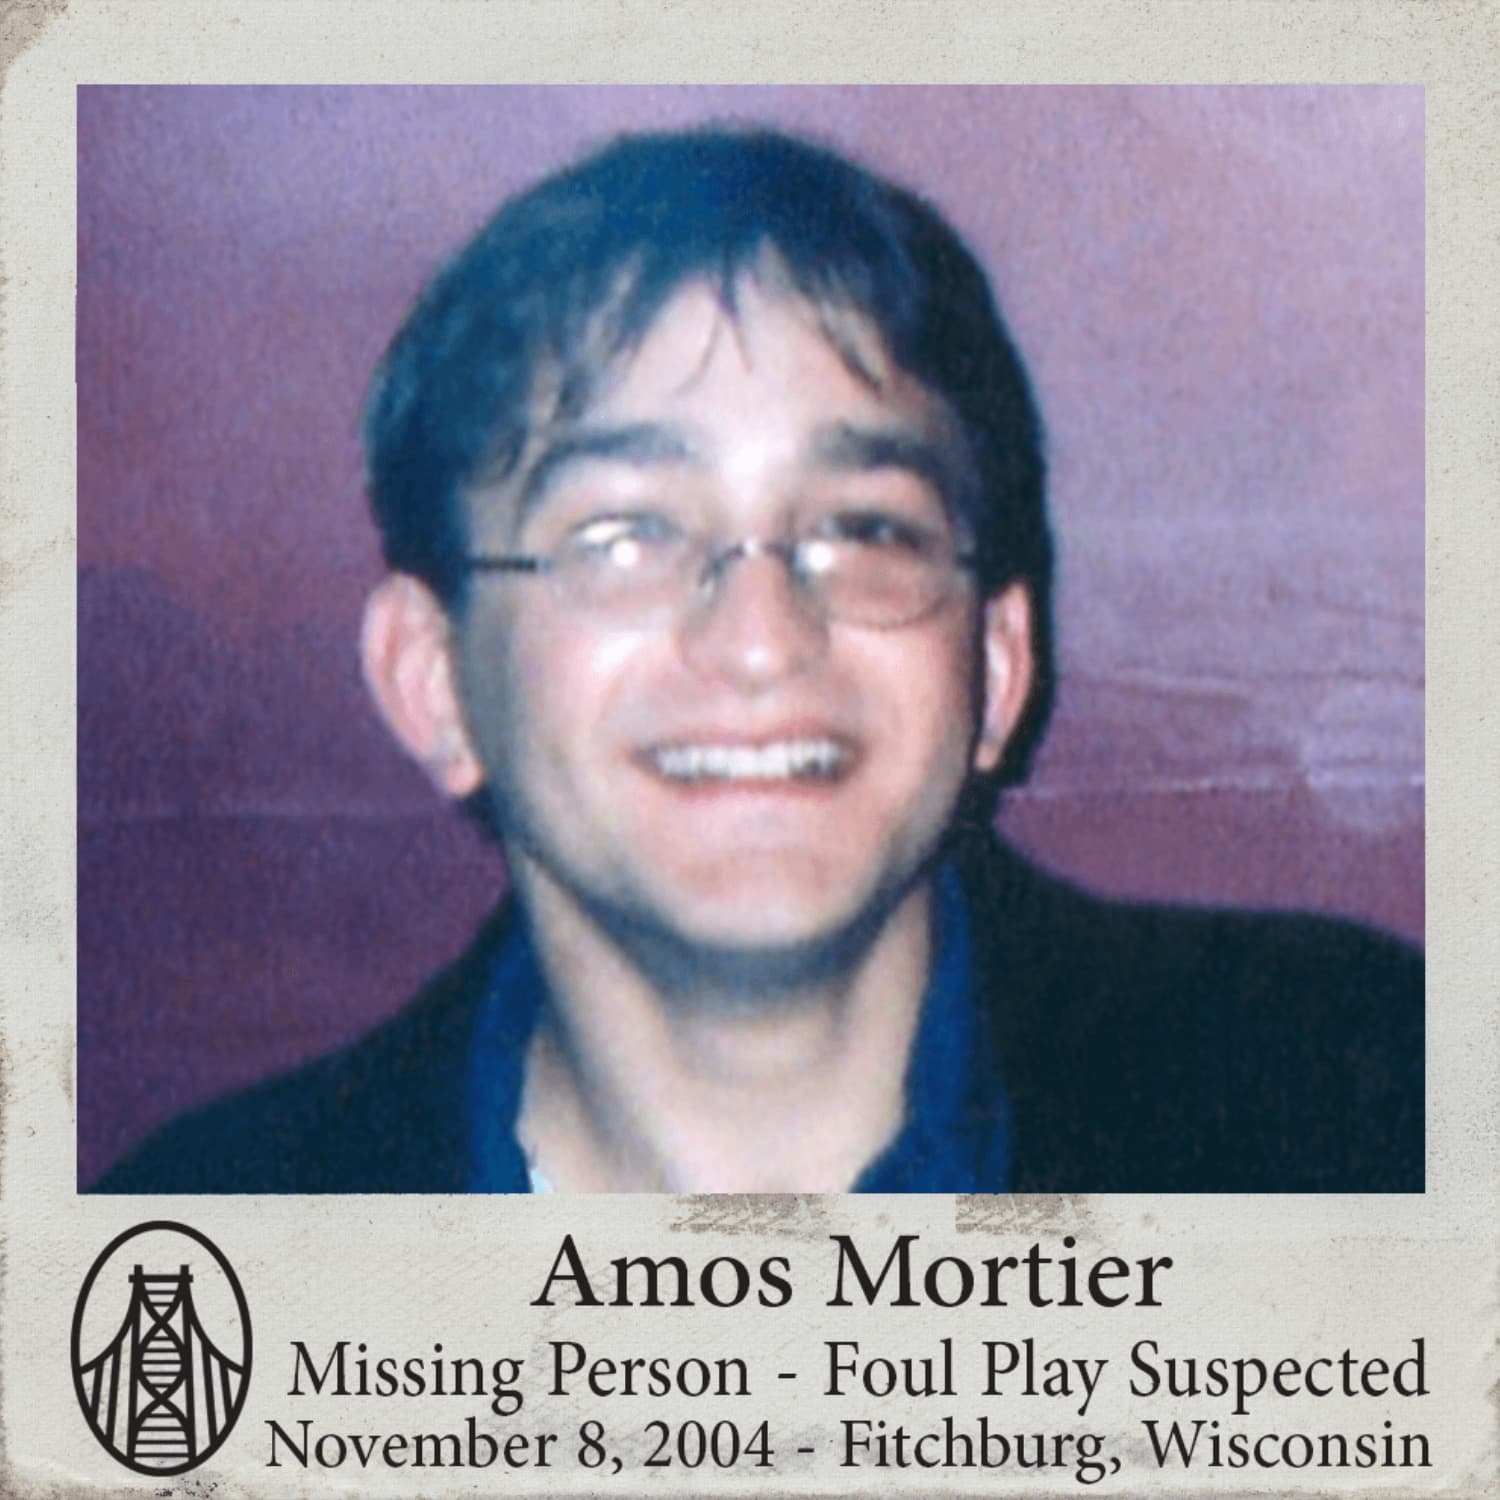 amos mortier - Amos Mortier Missing Person Foul Play Suspected Fitchburg, Wisconsin